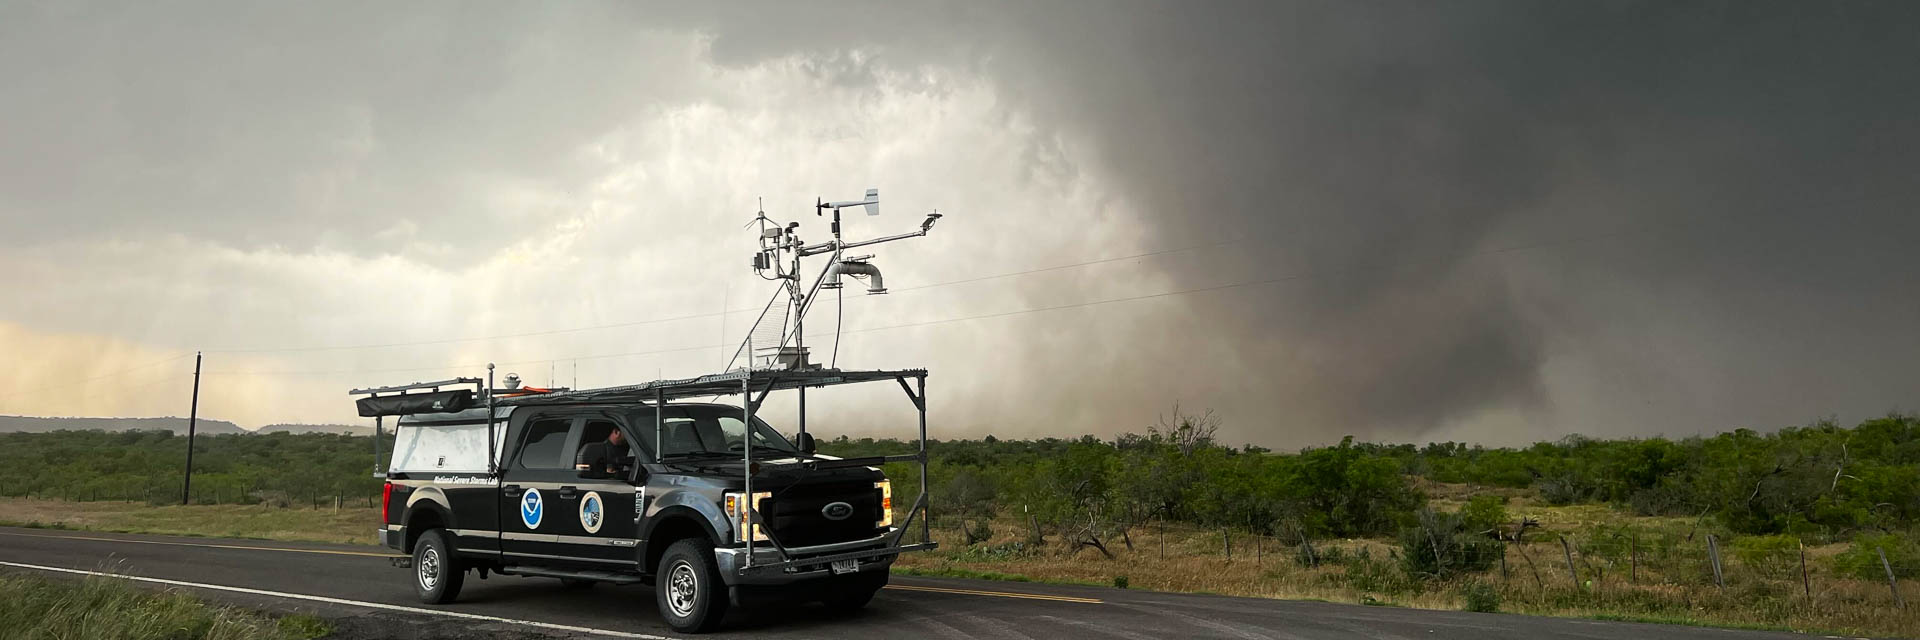 Truck with instruments mounted to the roof, in front of a tornado